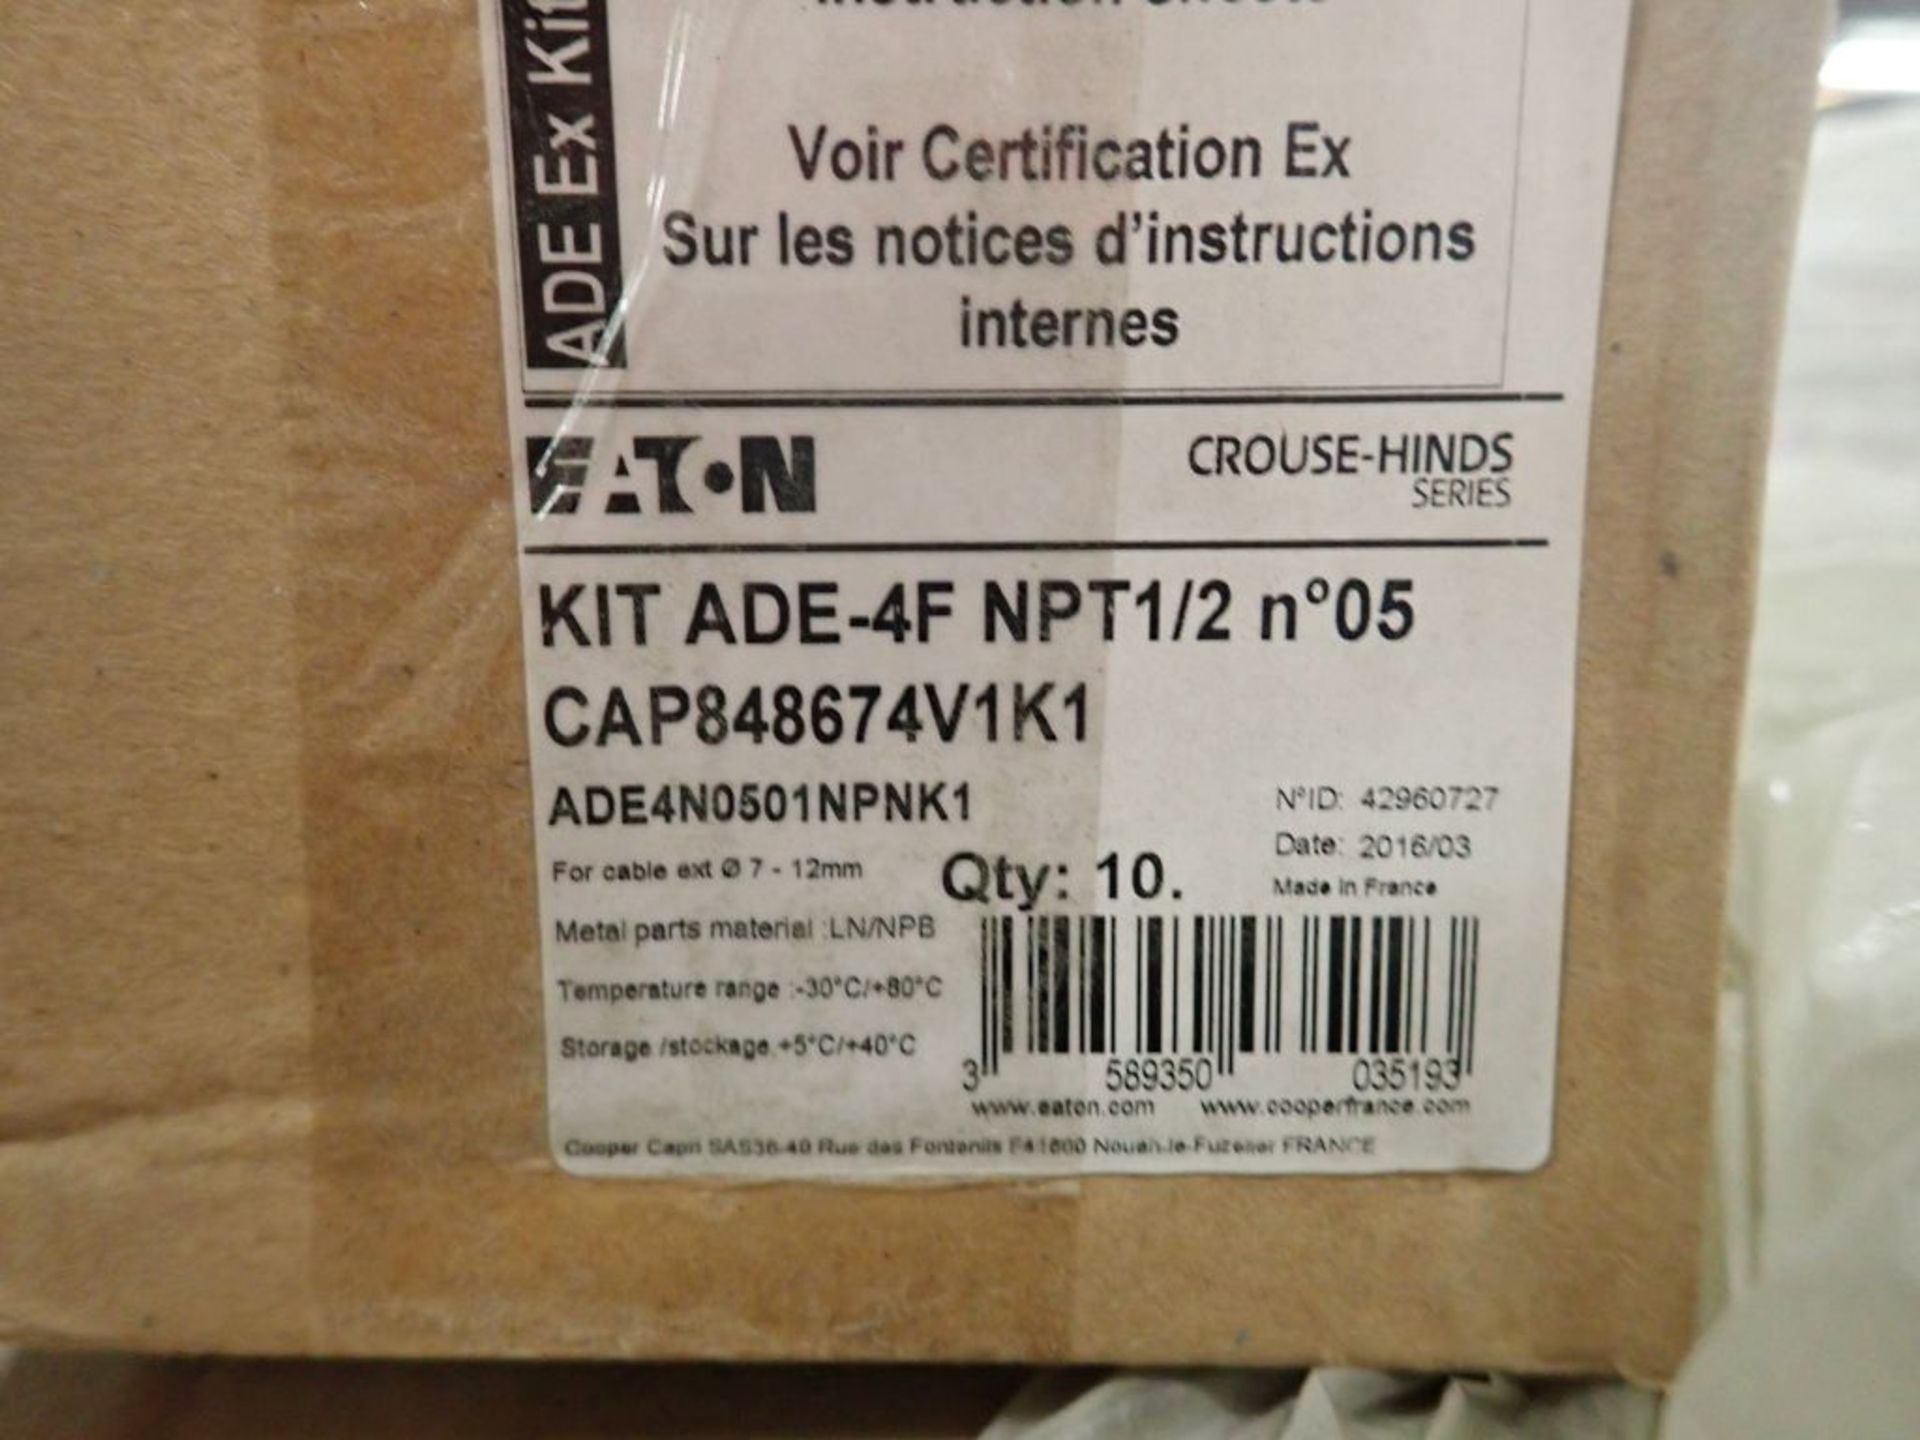 Lot of (2000) Eaton Flameproof Cableglands | Model No. CAP848674V1K1; For Cable 07-12mm; New - Image 12 of 15